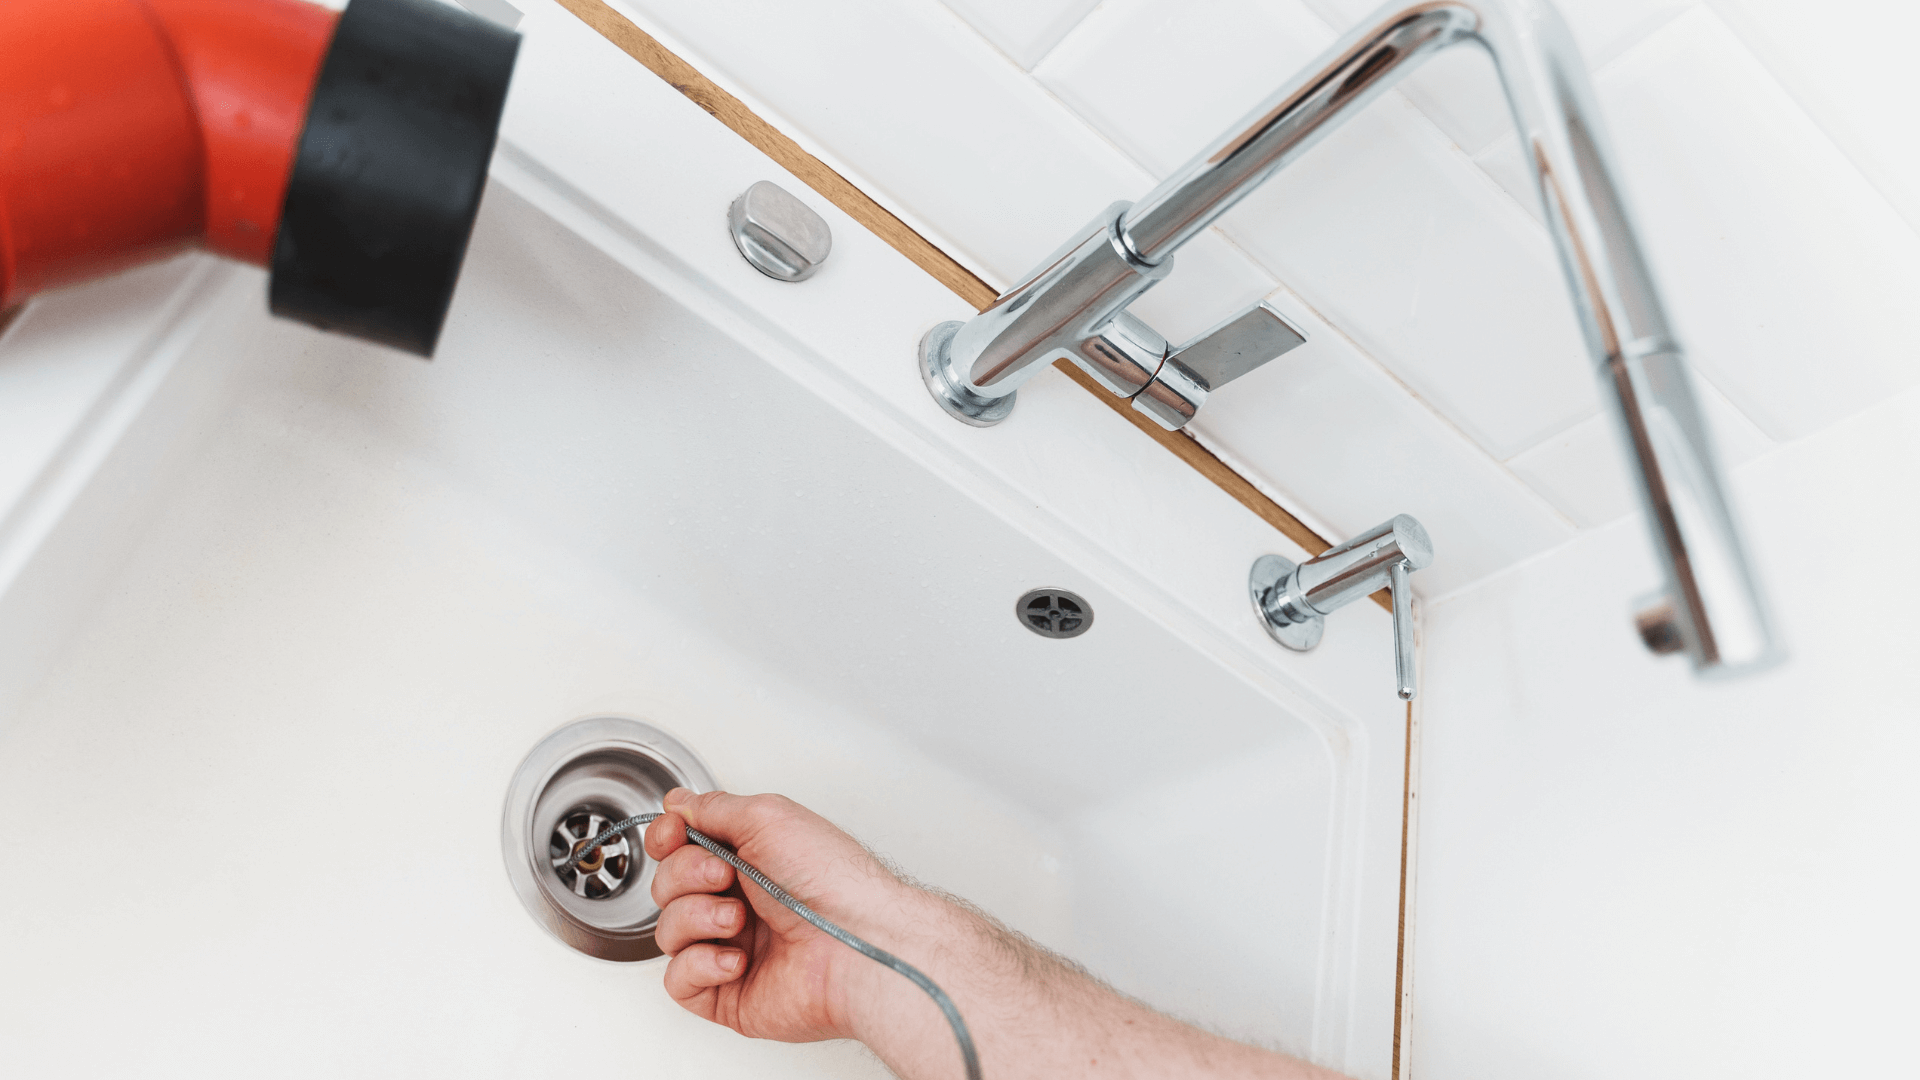 How To Clean Kitchen Sink Drain Lake